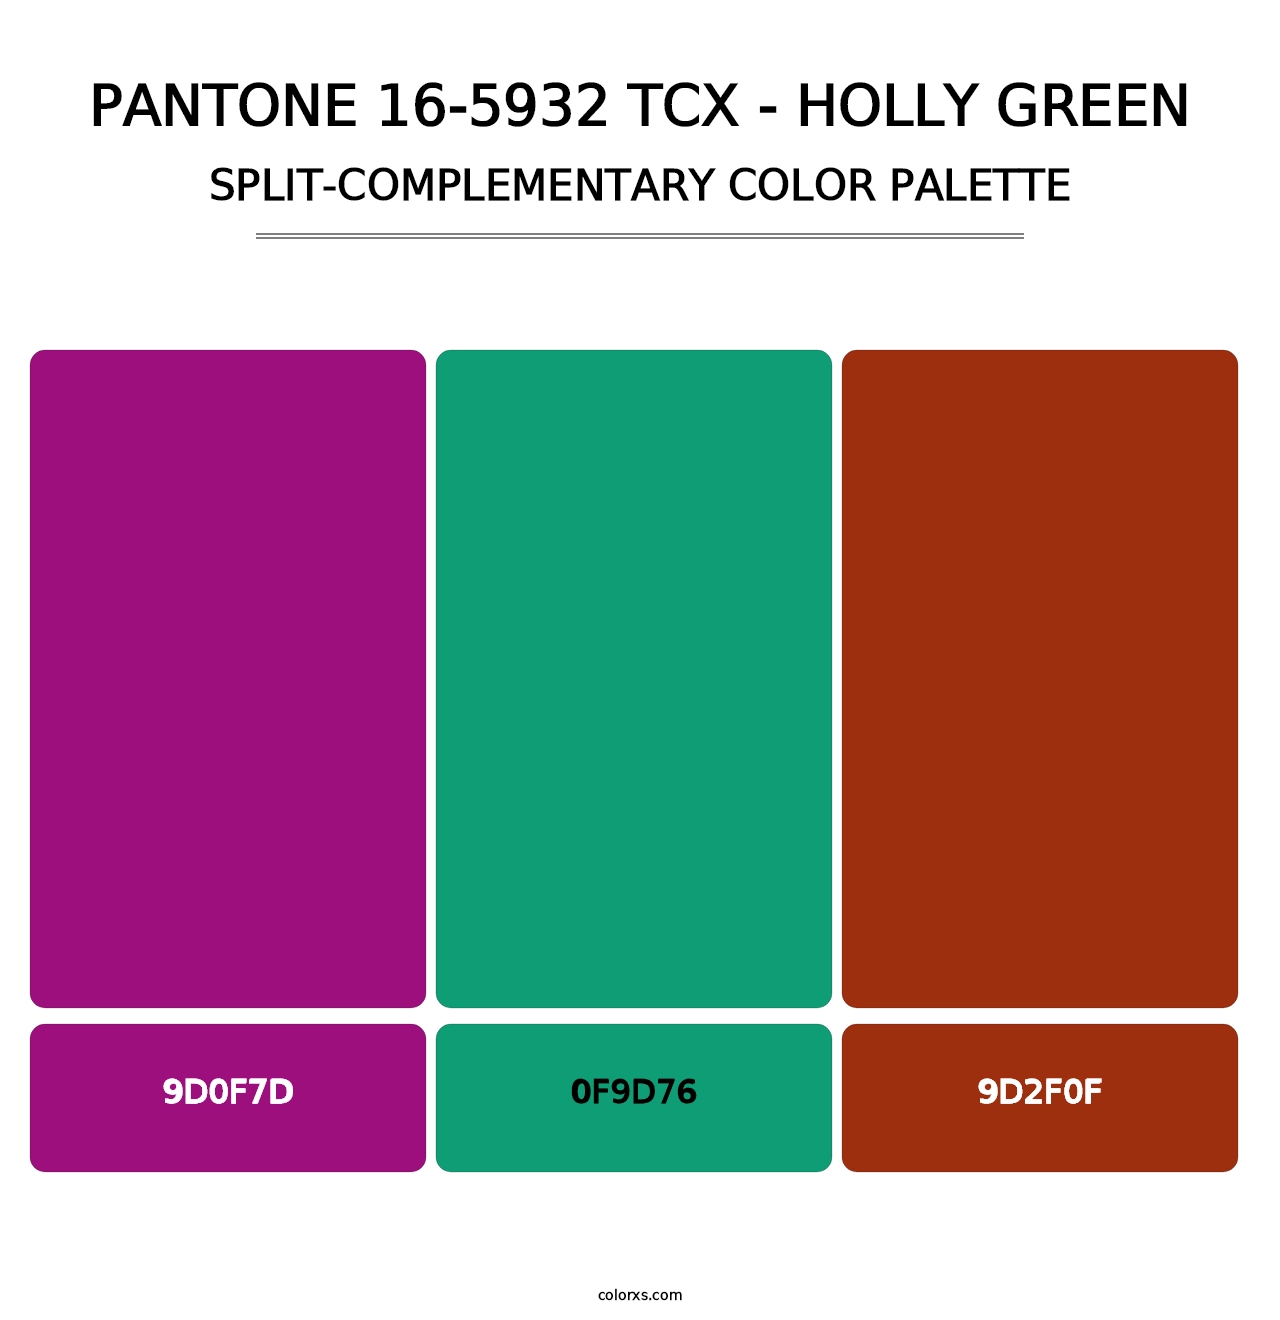 PANTONE 16-5932 TCX - Holly Green - Split-Complementary Color Palette